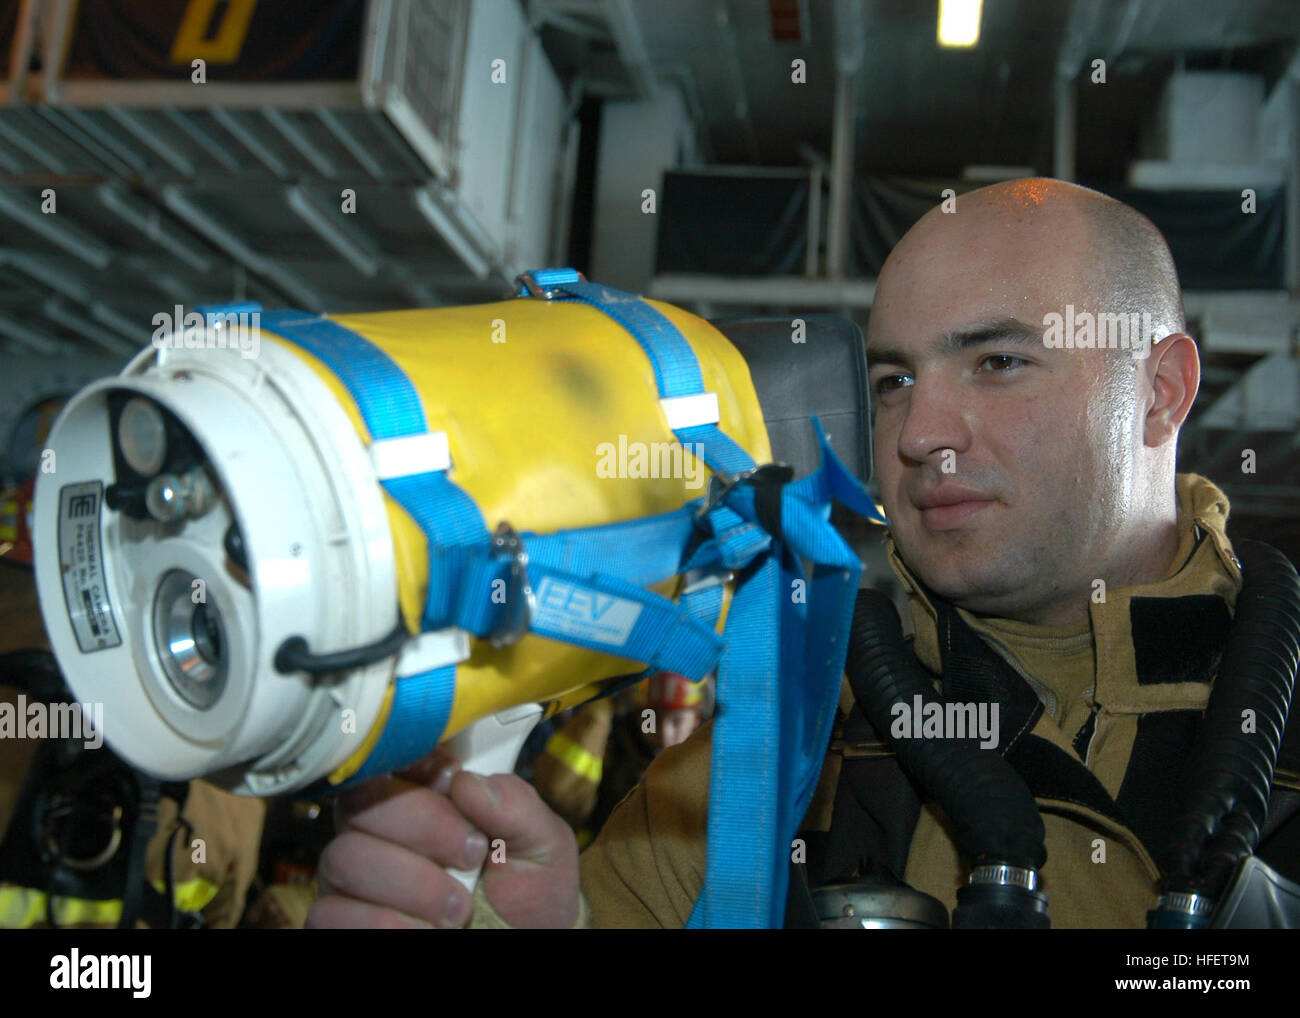 040106-N-7090S-003 Arabian Gulf (Jan 6, 2003) -- Damage Controlman 3rd Class Mike Milam from Dallas, Texas, looks through a Naval Firefighting Thermal Imager (NFTI) aboard USS Enterprise (CVN 65).  NFTI is a device that allows the user to see through dense smoke and steam by sensing the difference in infrared radiation given off by objects with a temperature difference of at least four degrees Fahrenheit.  The Enterprise Carrier Strike Group (CSG) is currently deployed conducting missions in support of Operation Iraqi Freedom and the continued war on terrorism.  U.S. Navy photo by Photographer Stock Photo